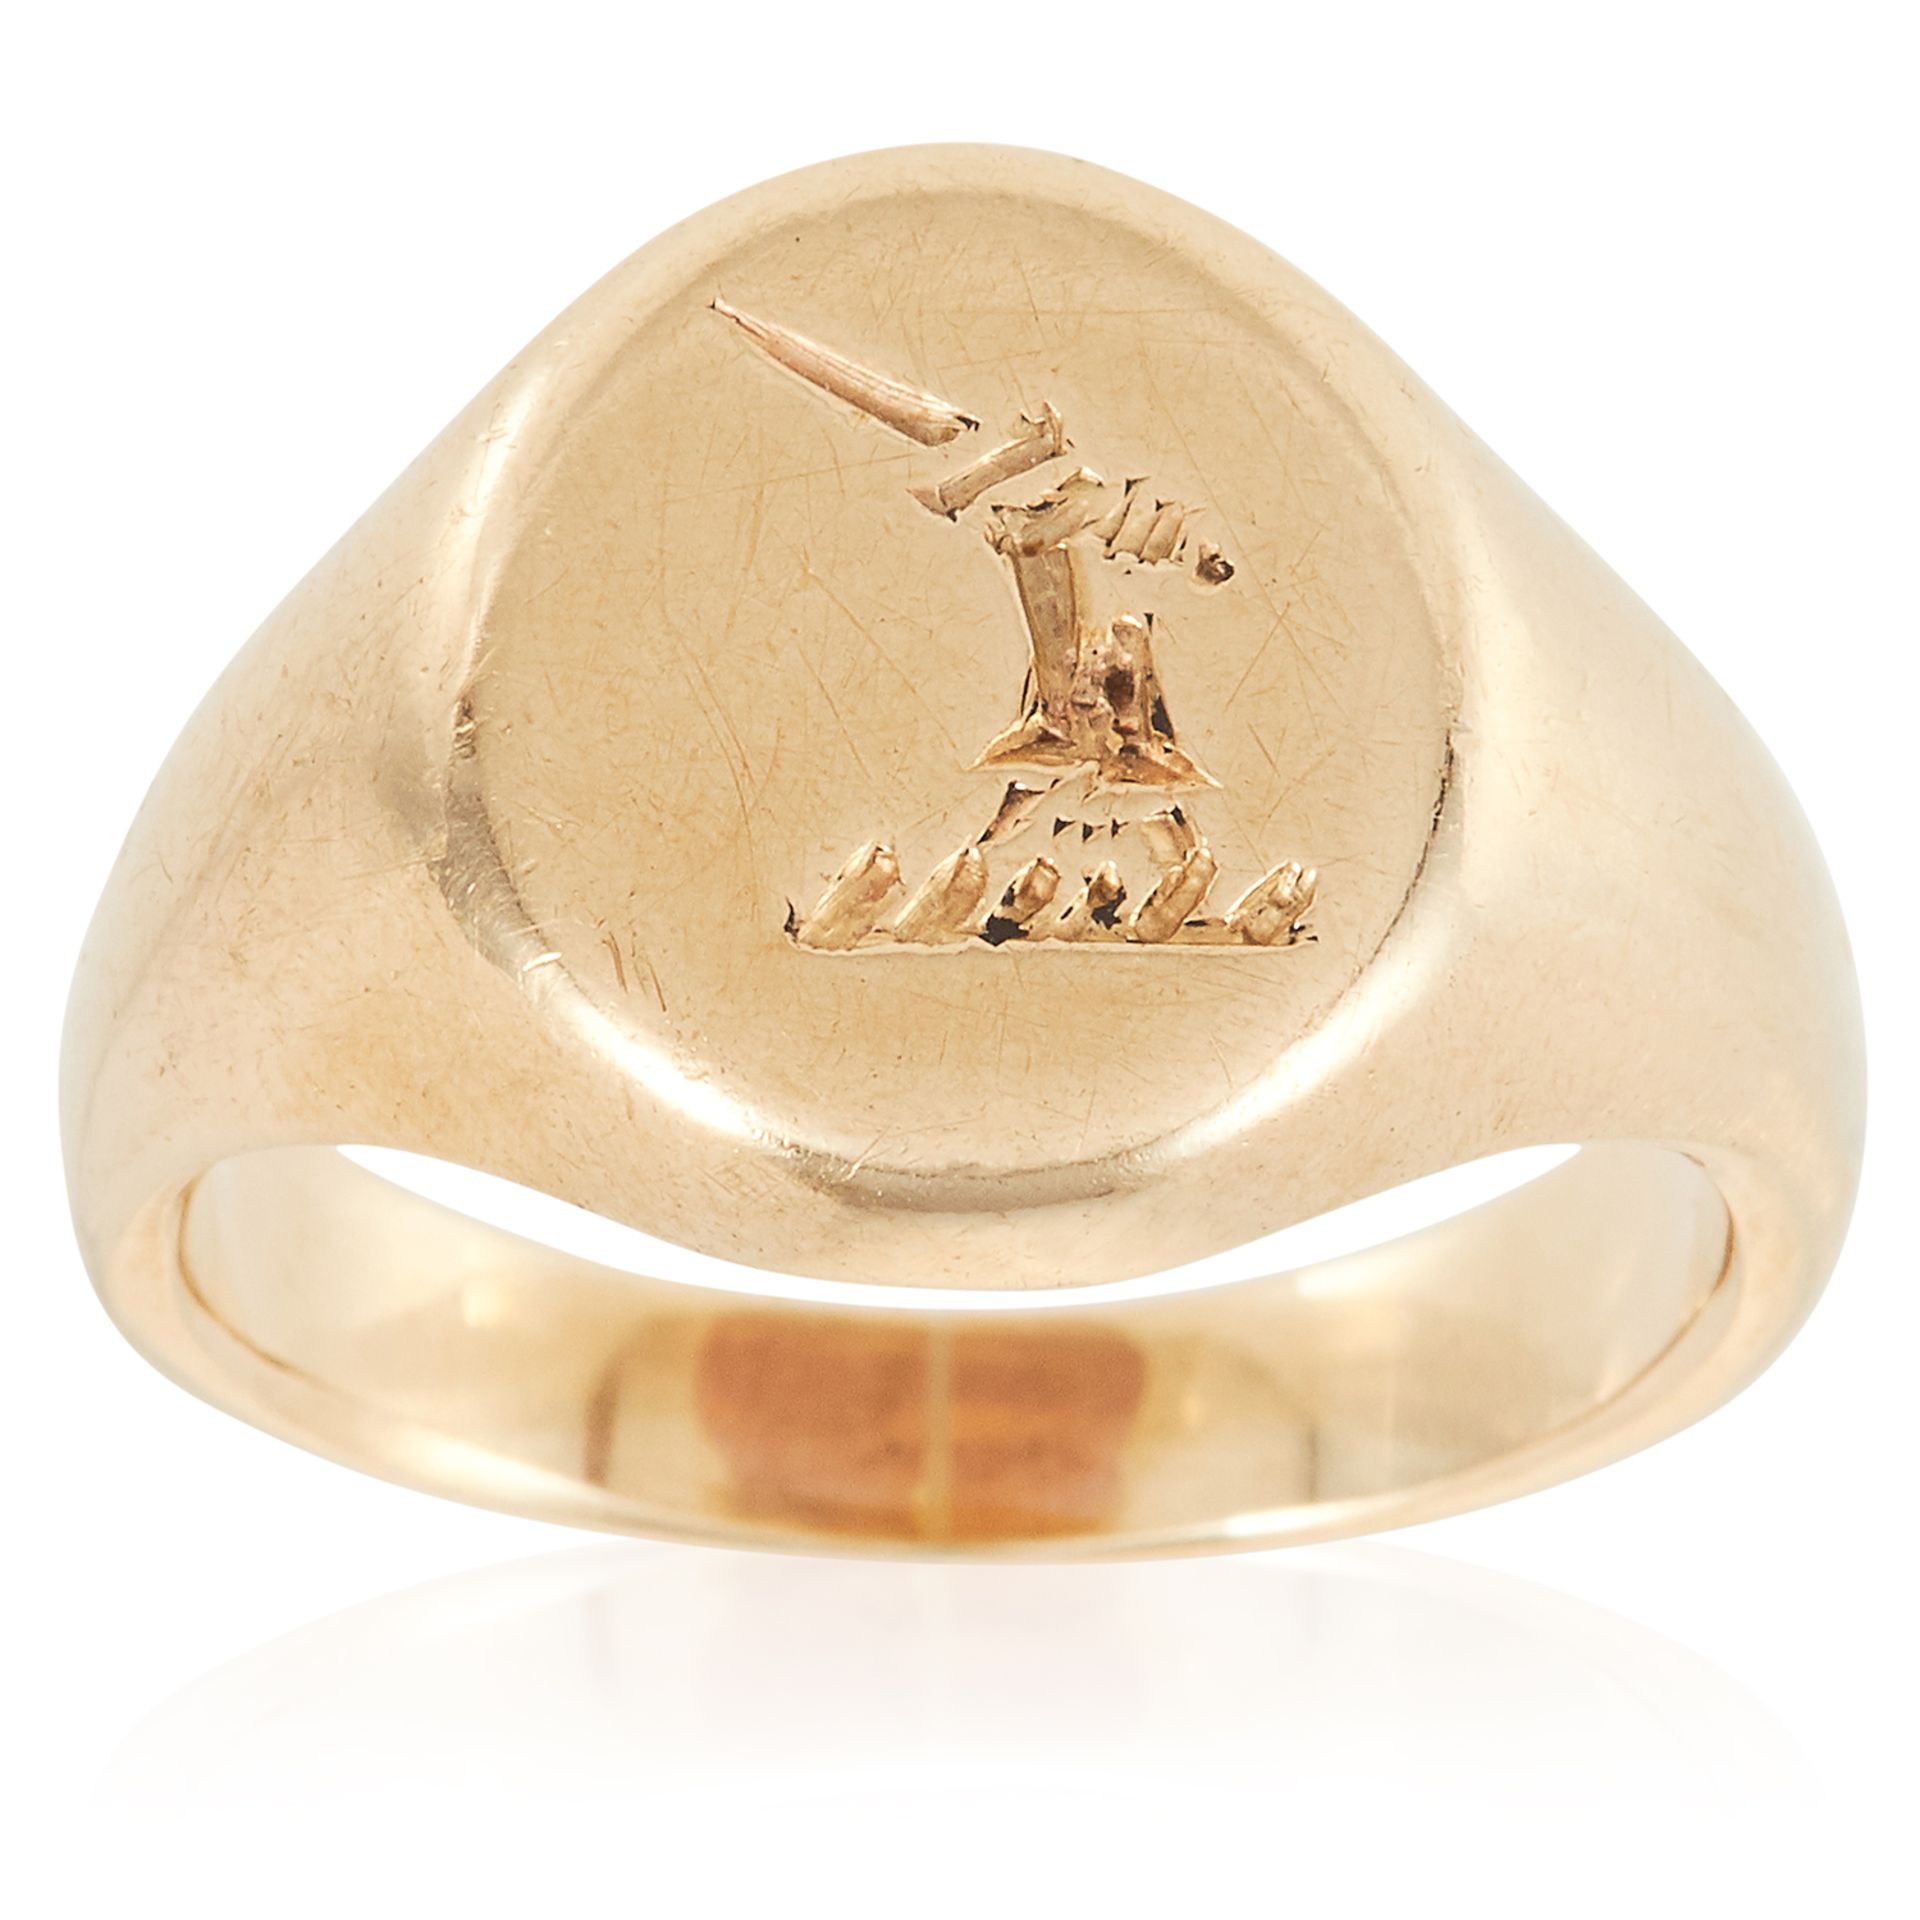 AN ANTIQUE INTAGLIO SIGNET RING in yellow gold, the oval face with engraved heraldic crest, size L /